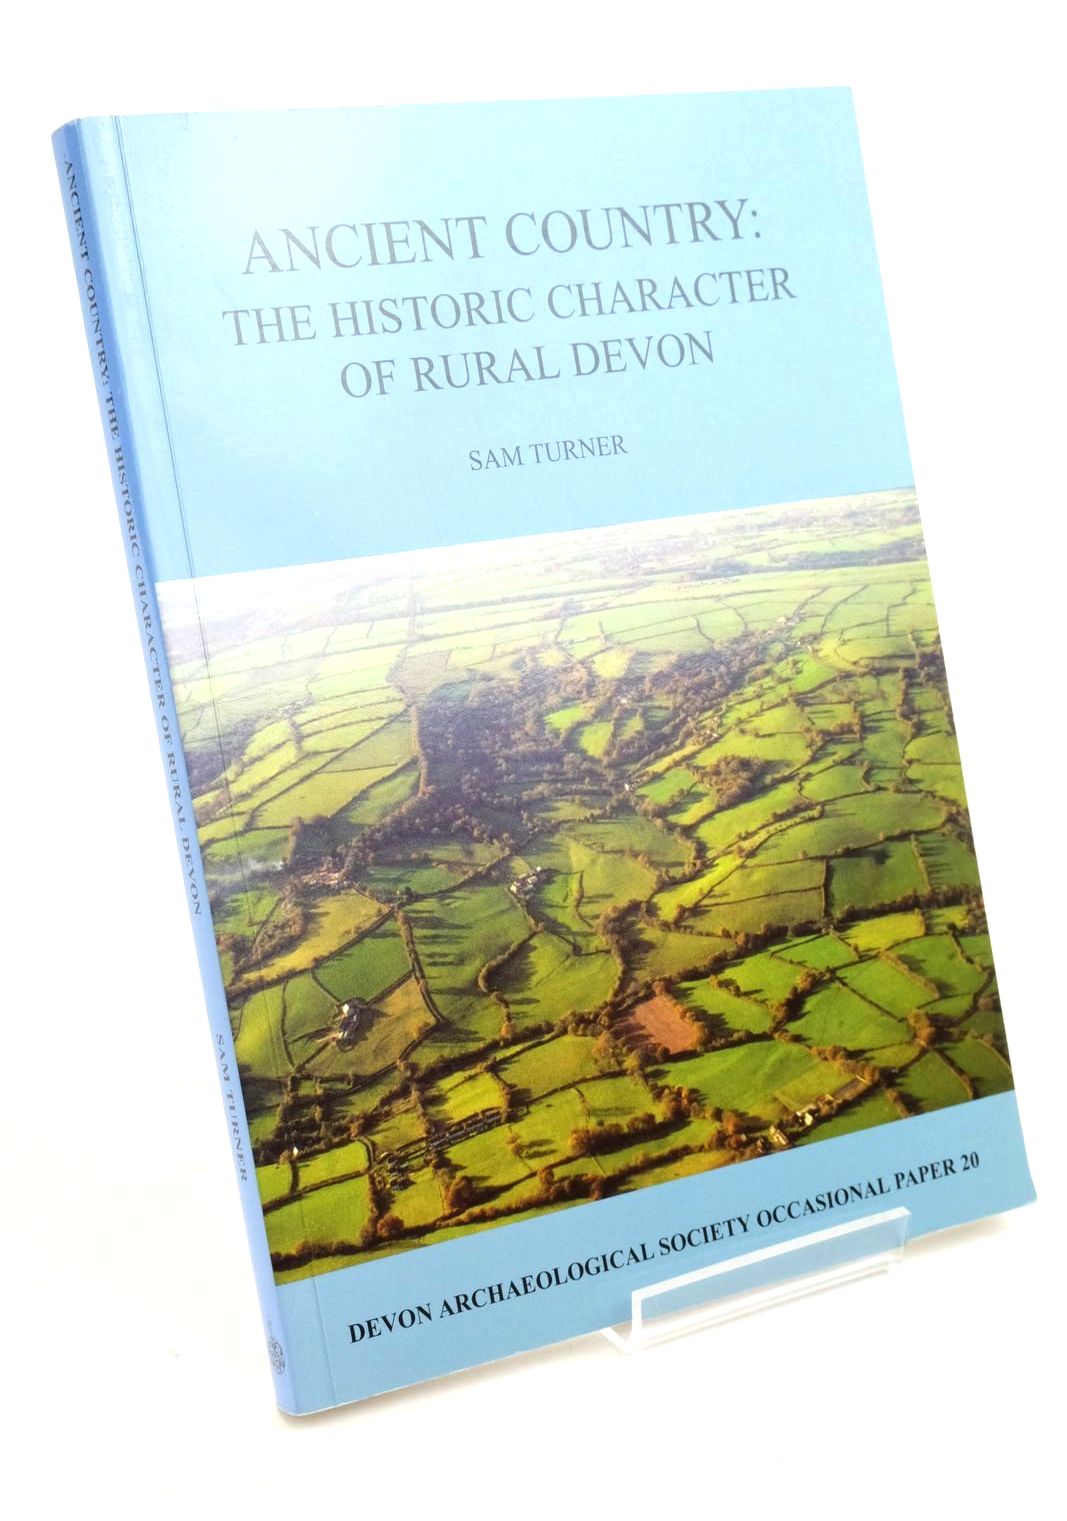 Photo of ANCIENT COUNTRY: THE HISTORIC CHARACTER OF RURAL DEVON written by Turner, Sam published by Devon Archaeological Society (STOCK CODE: 1322421)  for sale by Stella & Rose's Books